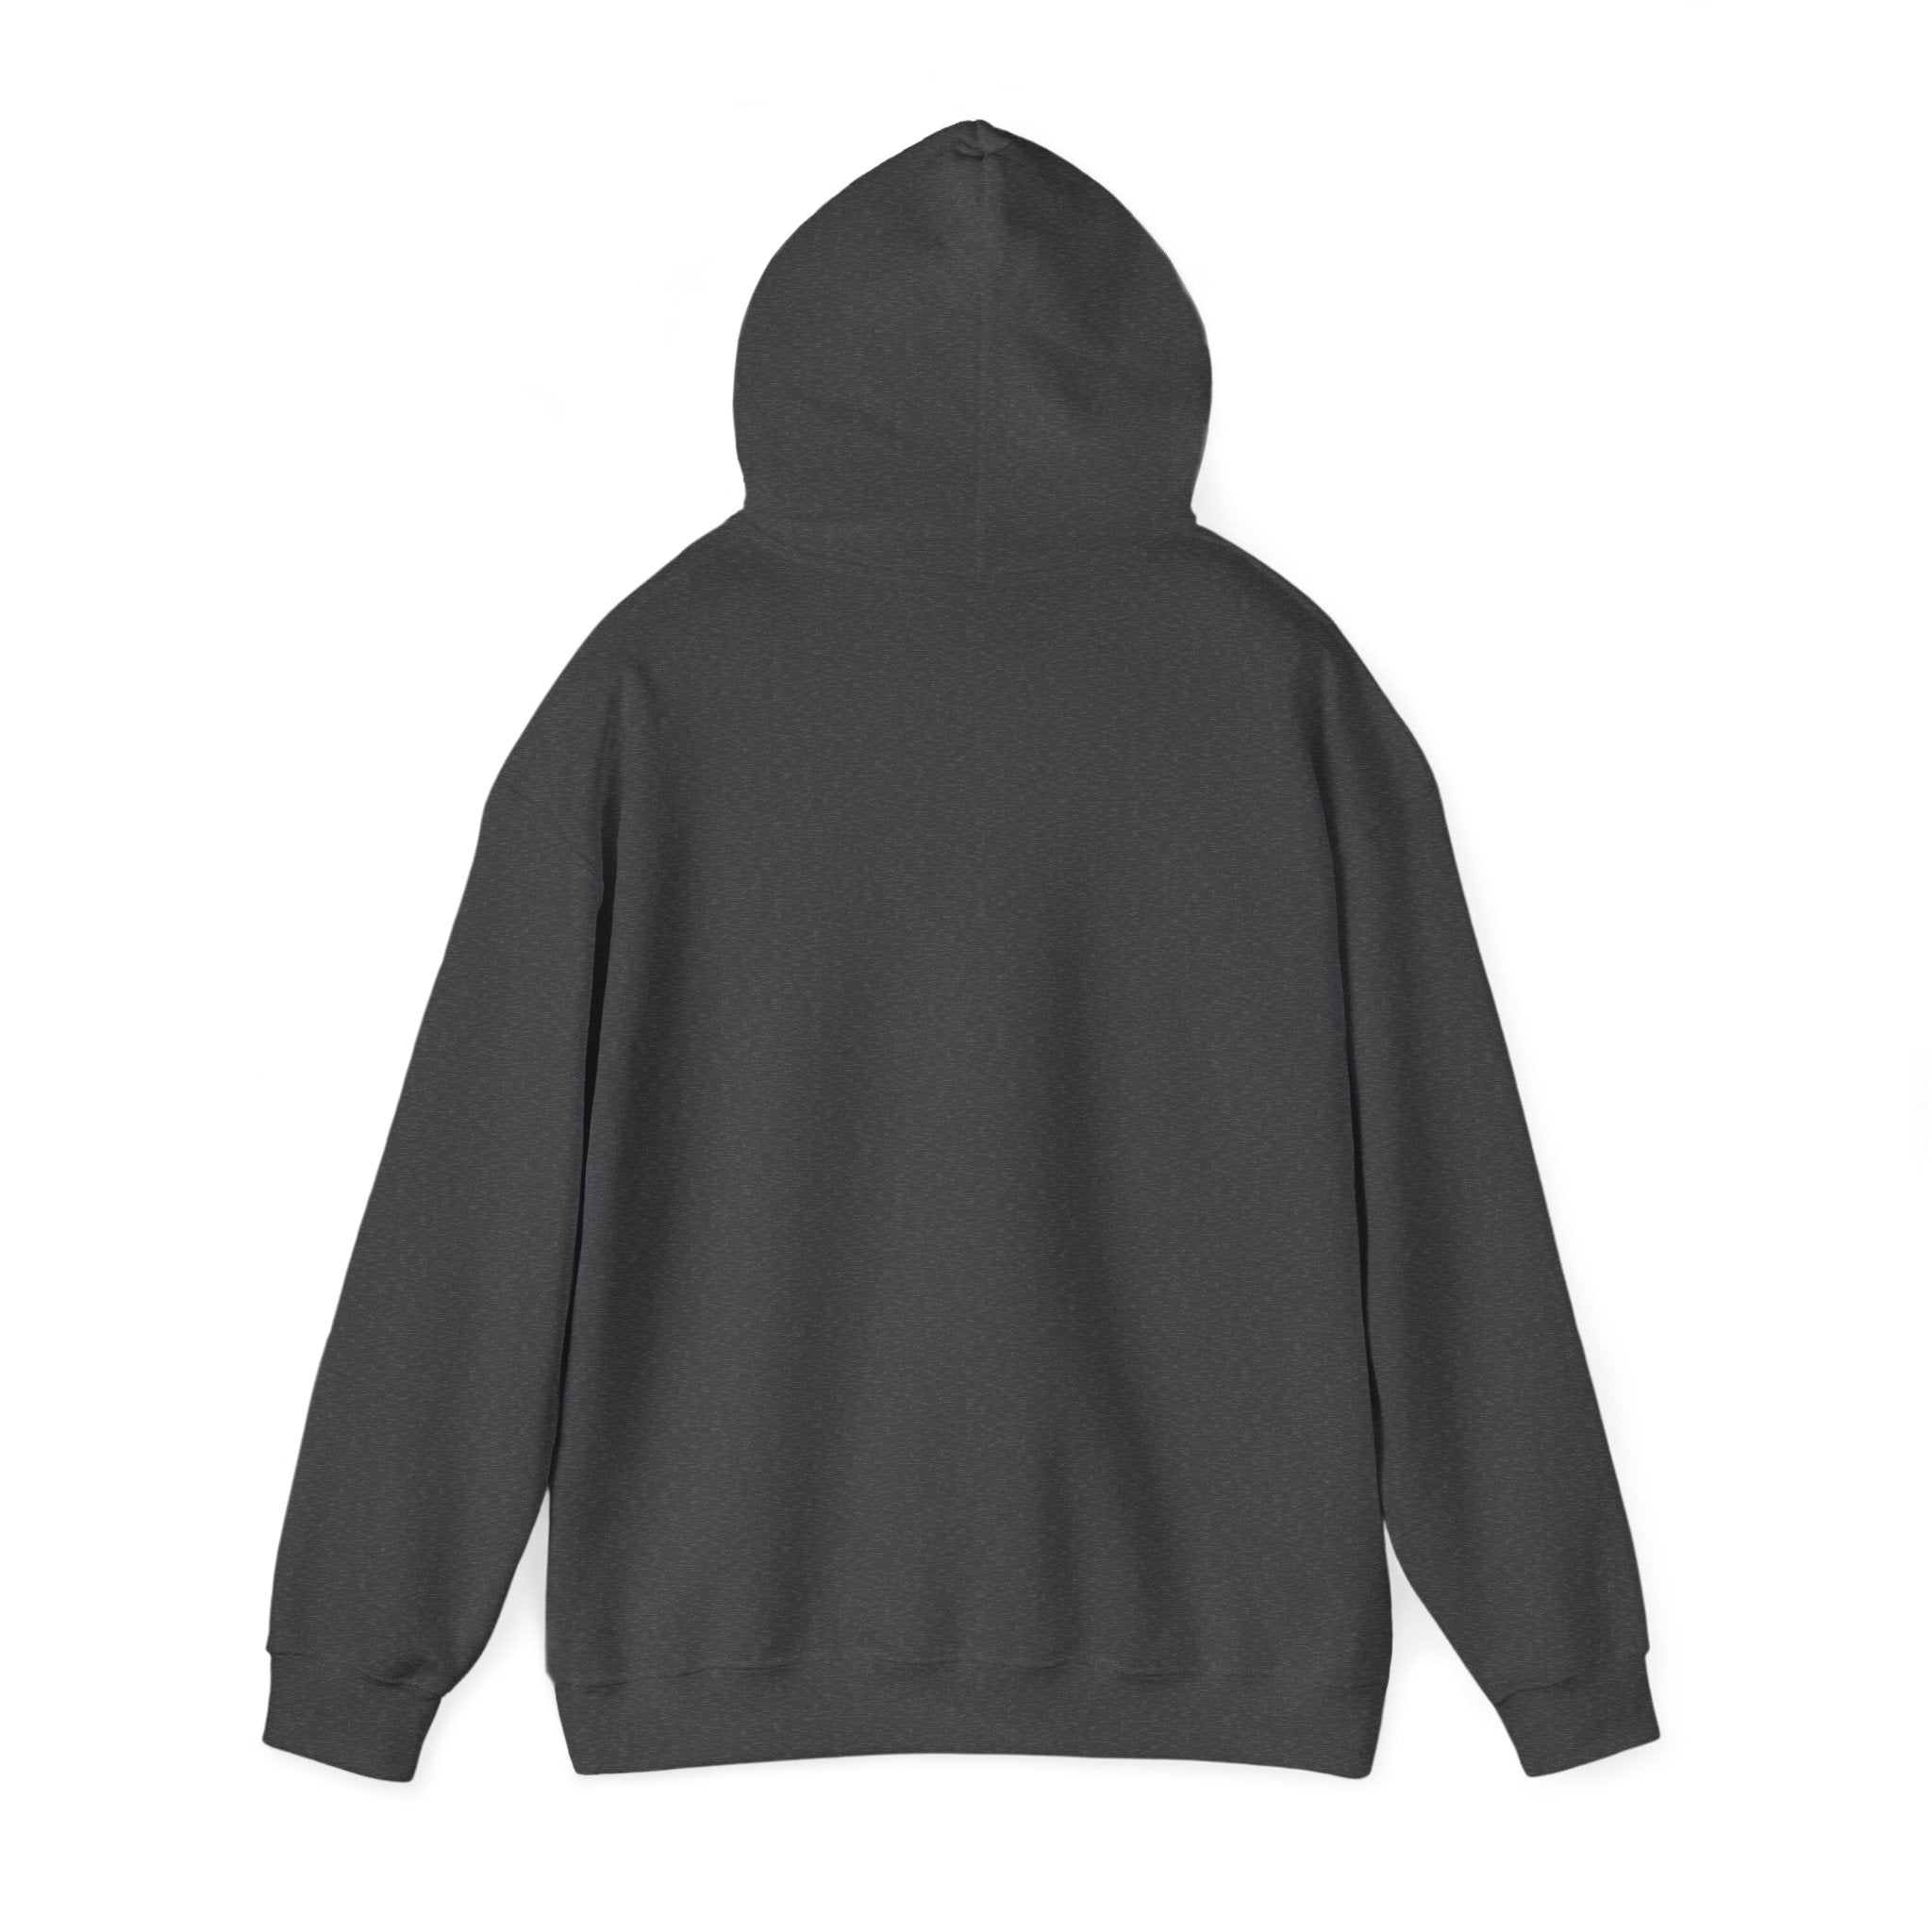 Back view of a plain dark gray RU - Hooded Sweatshirt showcasing the hood and long sleeves, epitomizing style and ease, isolated on a white background.